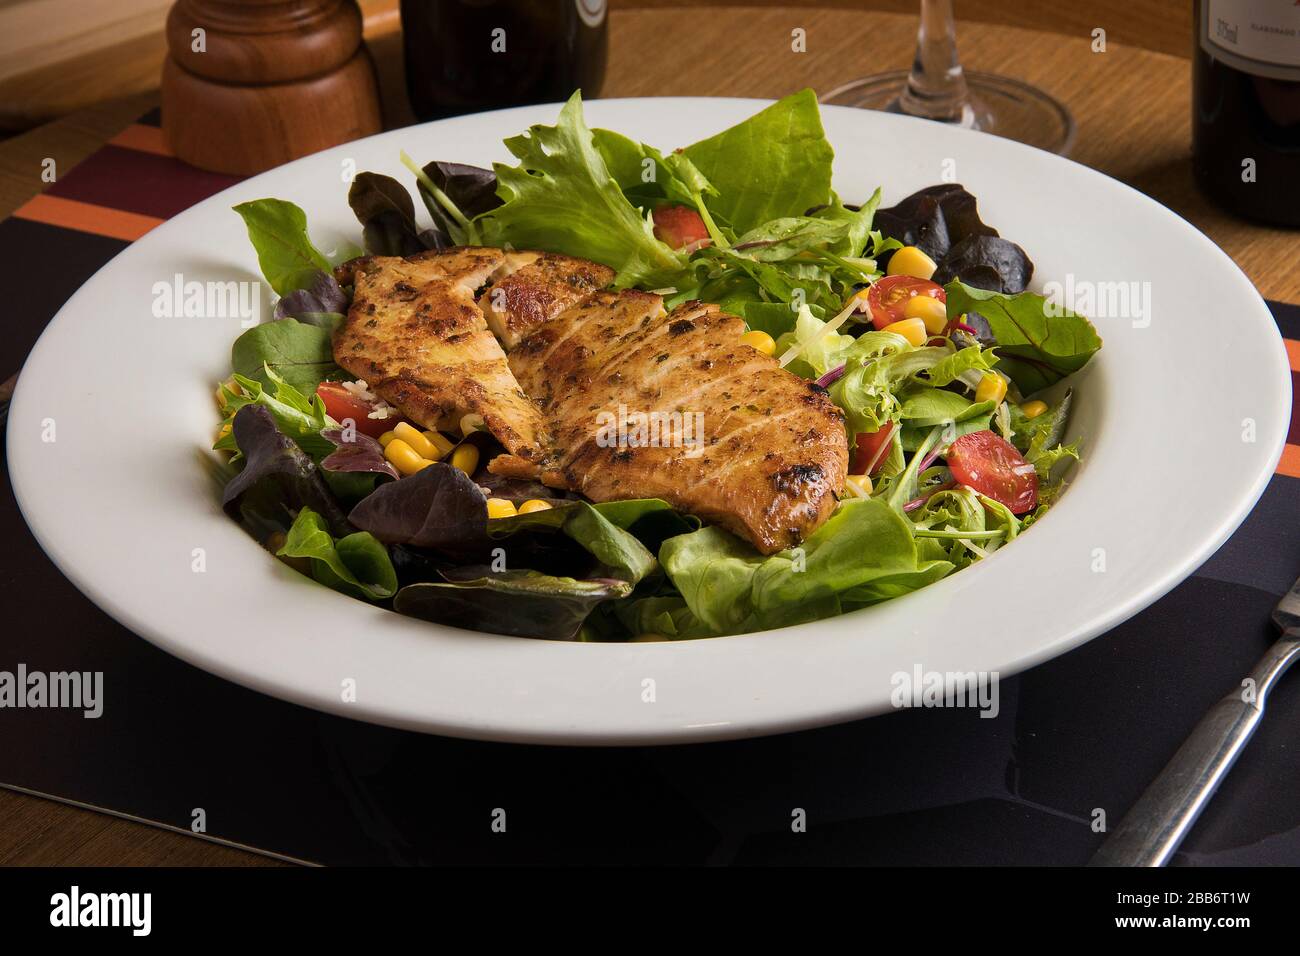 Plate of grilled chicken salad Stock Photo